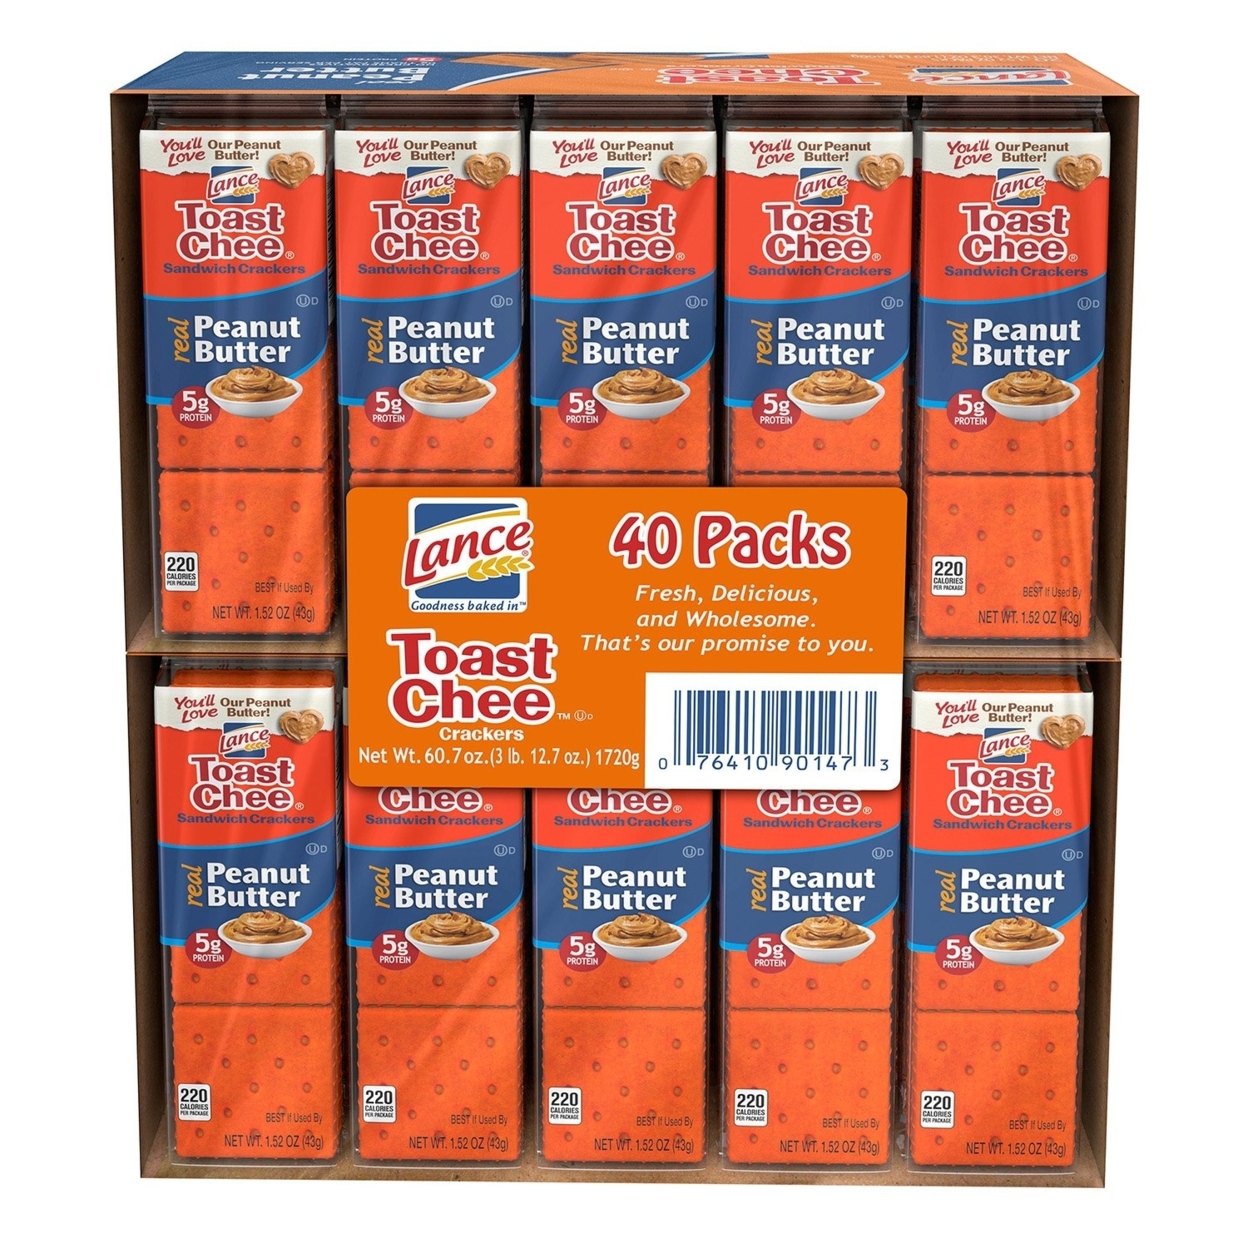 Lance Toast Chee Peanut Butter Crackers (40 Count)